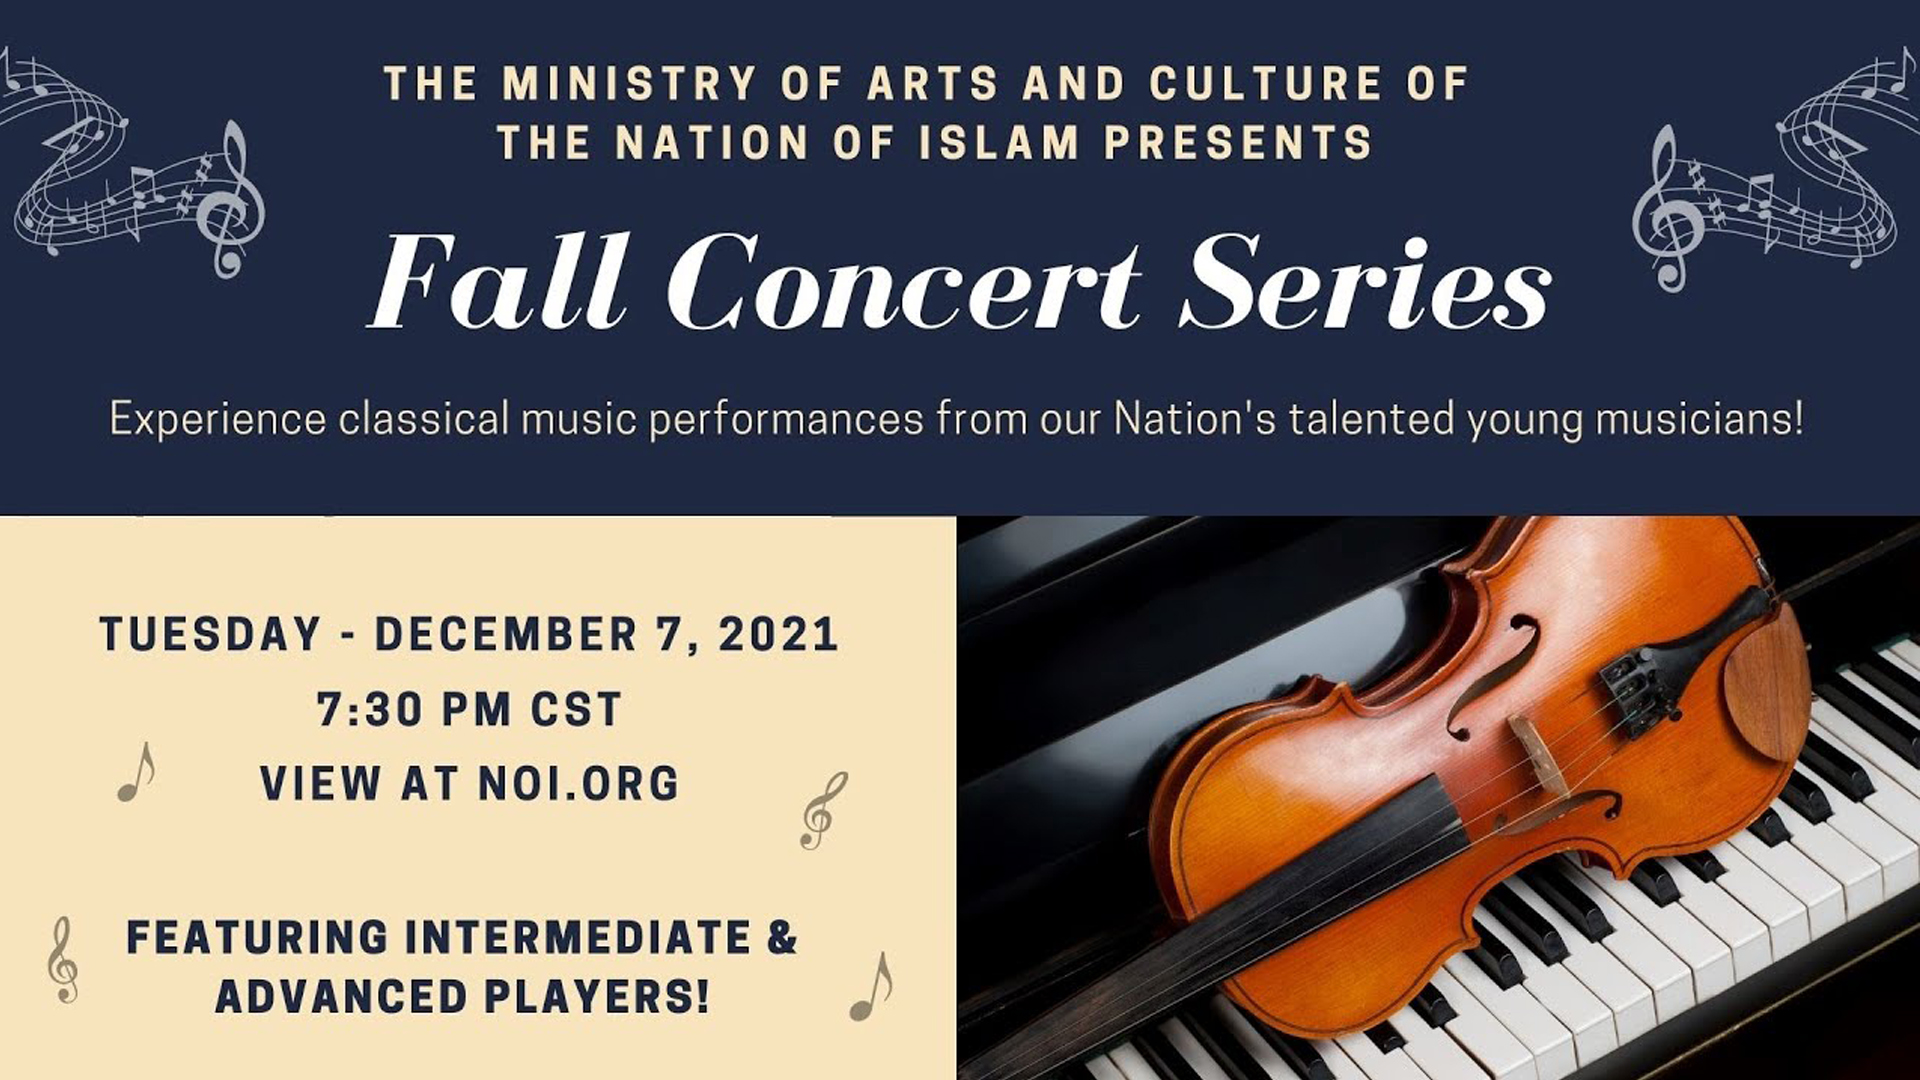 Ministry of Arts and Culture of The Nation of Islam presents Fall Concert Music Series